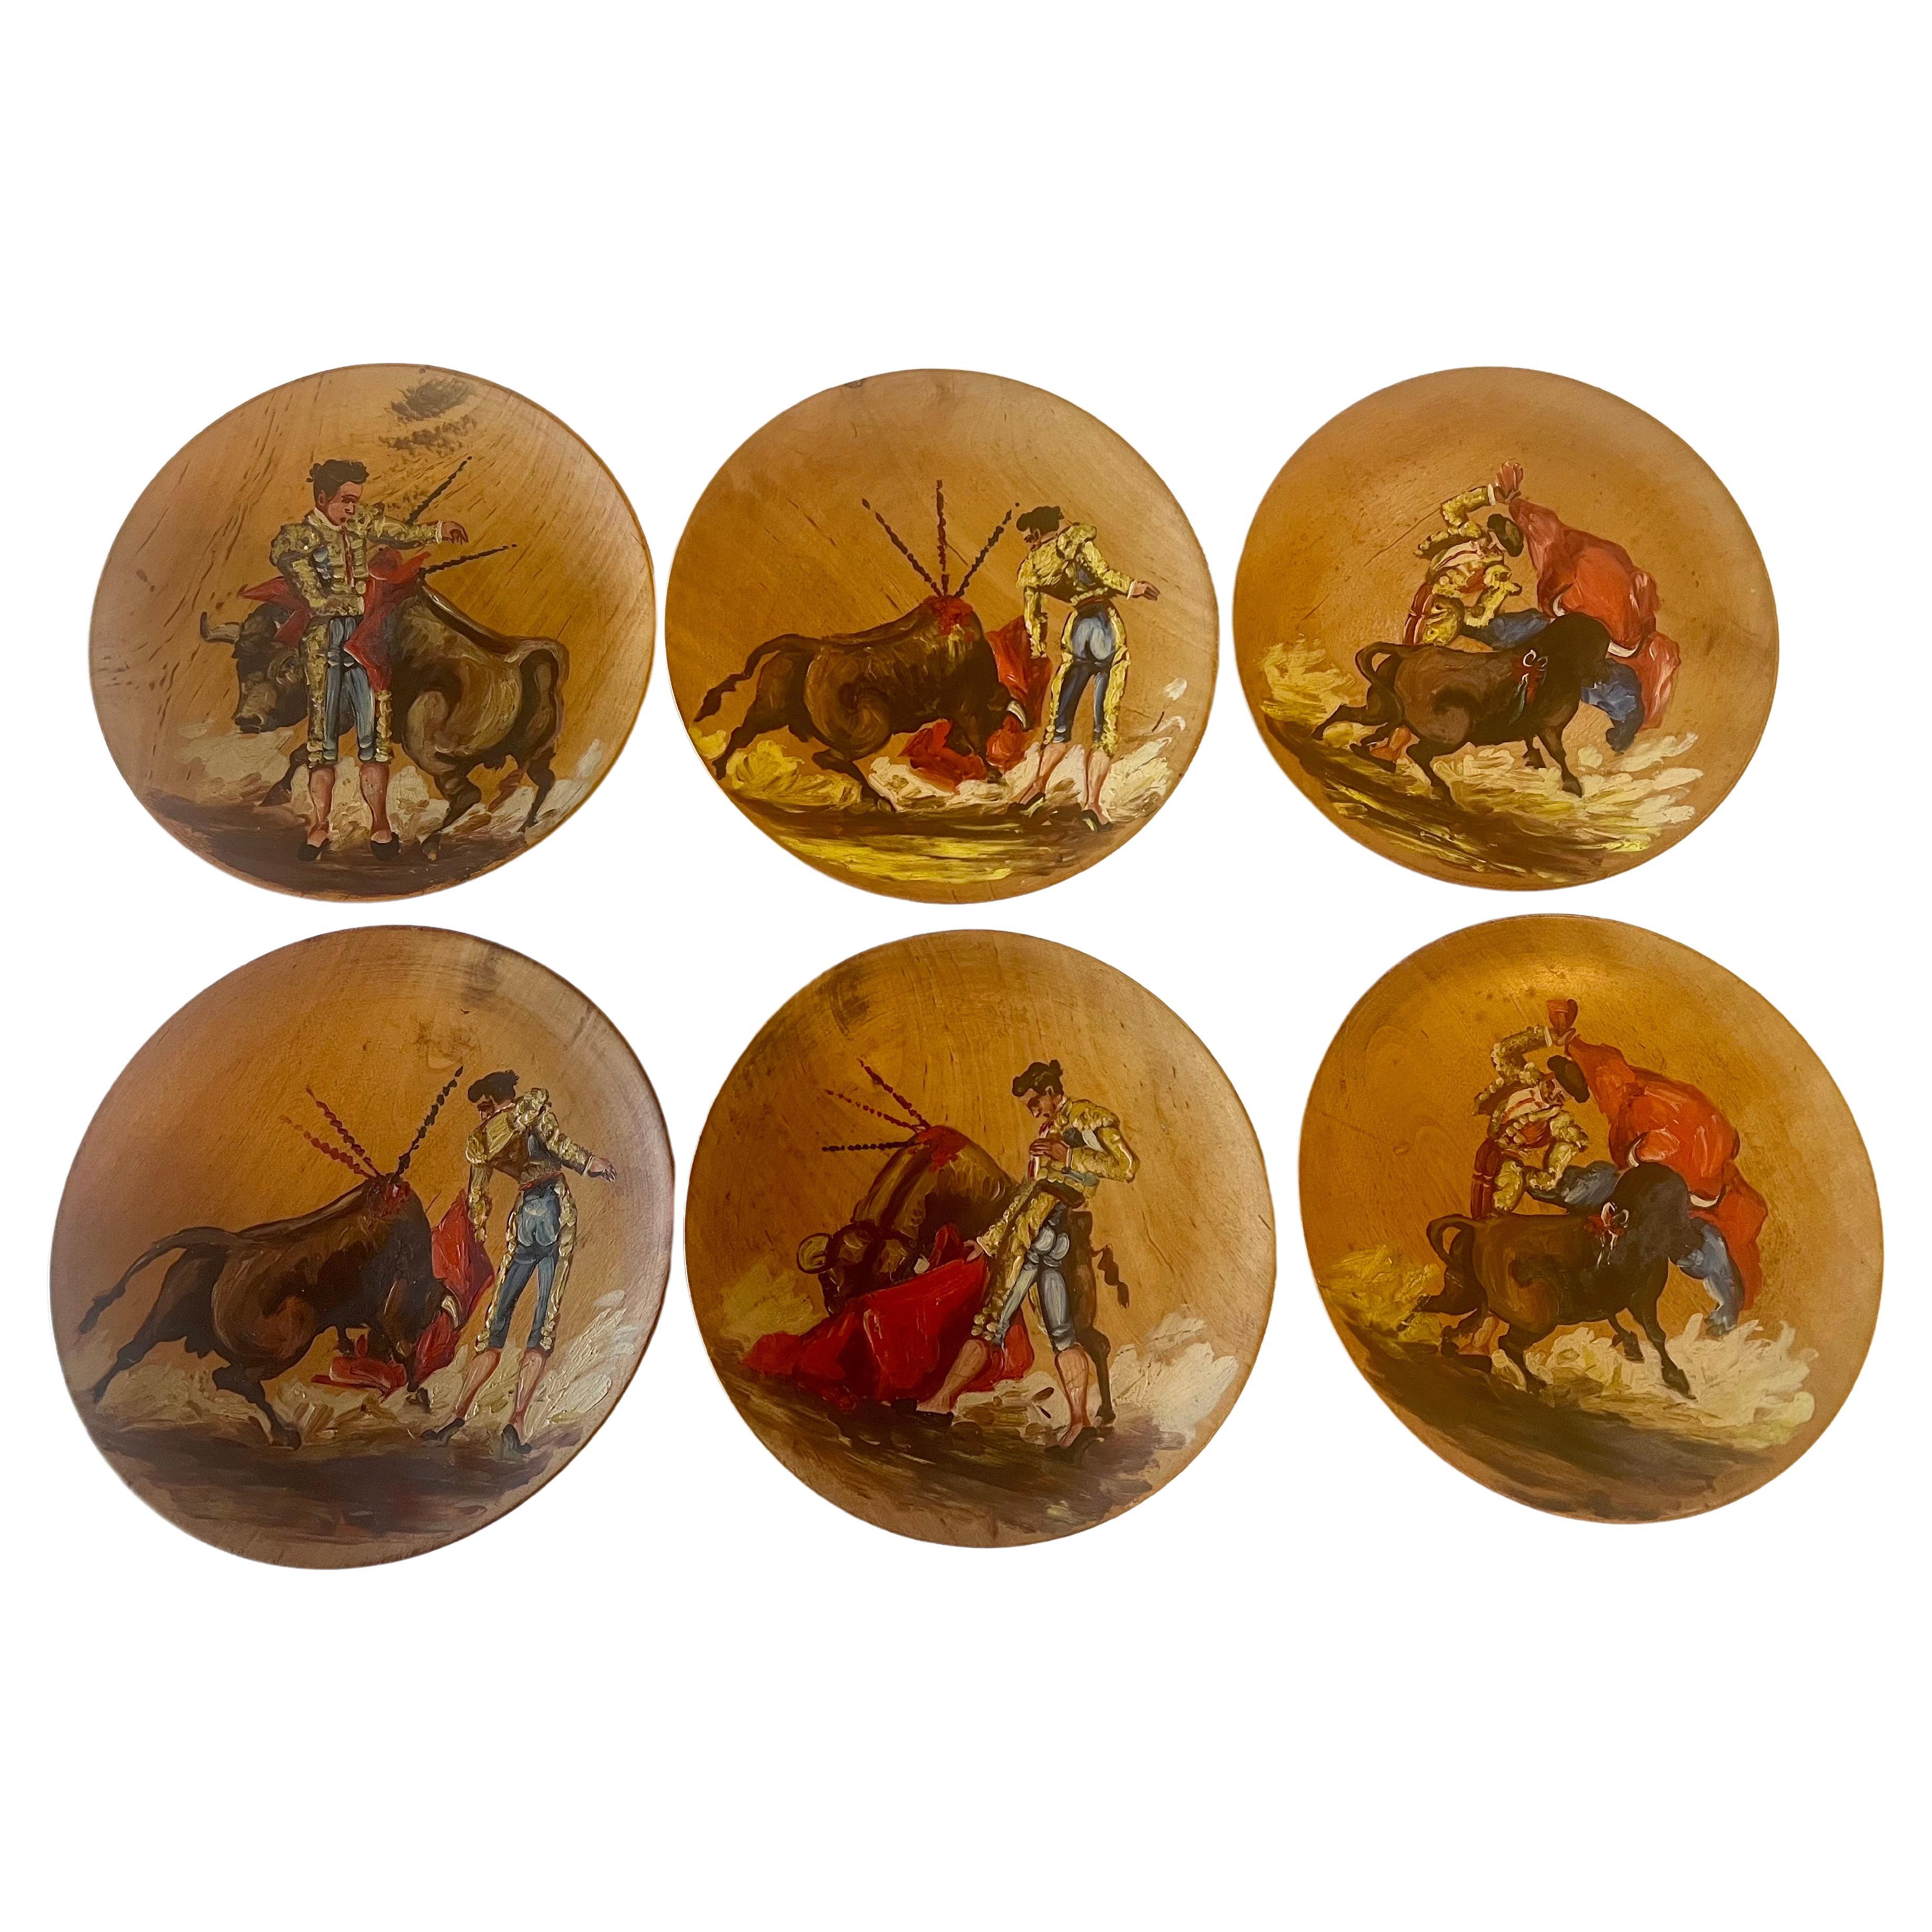 Collection of 6 Wood Hand Painted Painted Plates of Bull fight "La fiesta Brava" For Sale